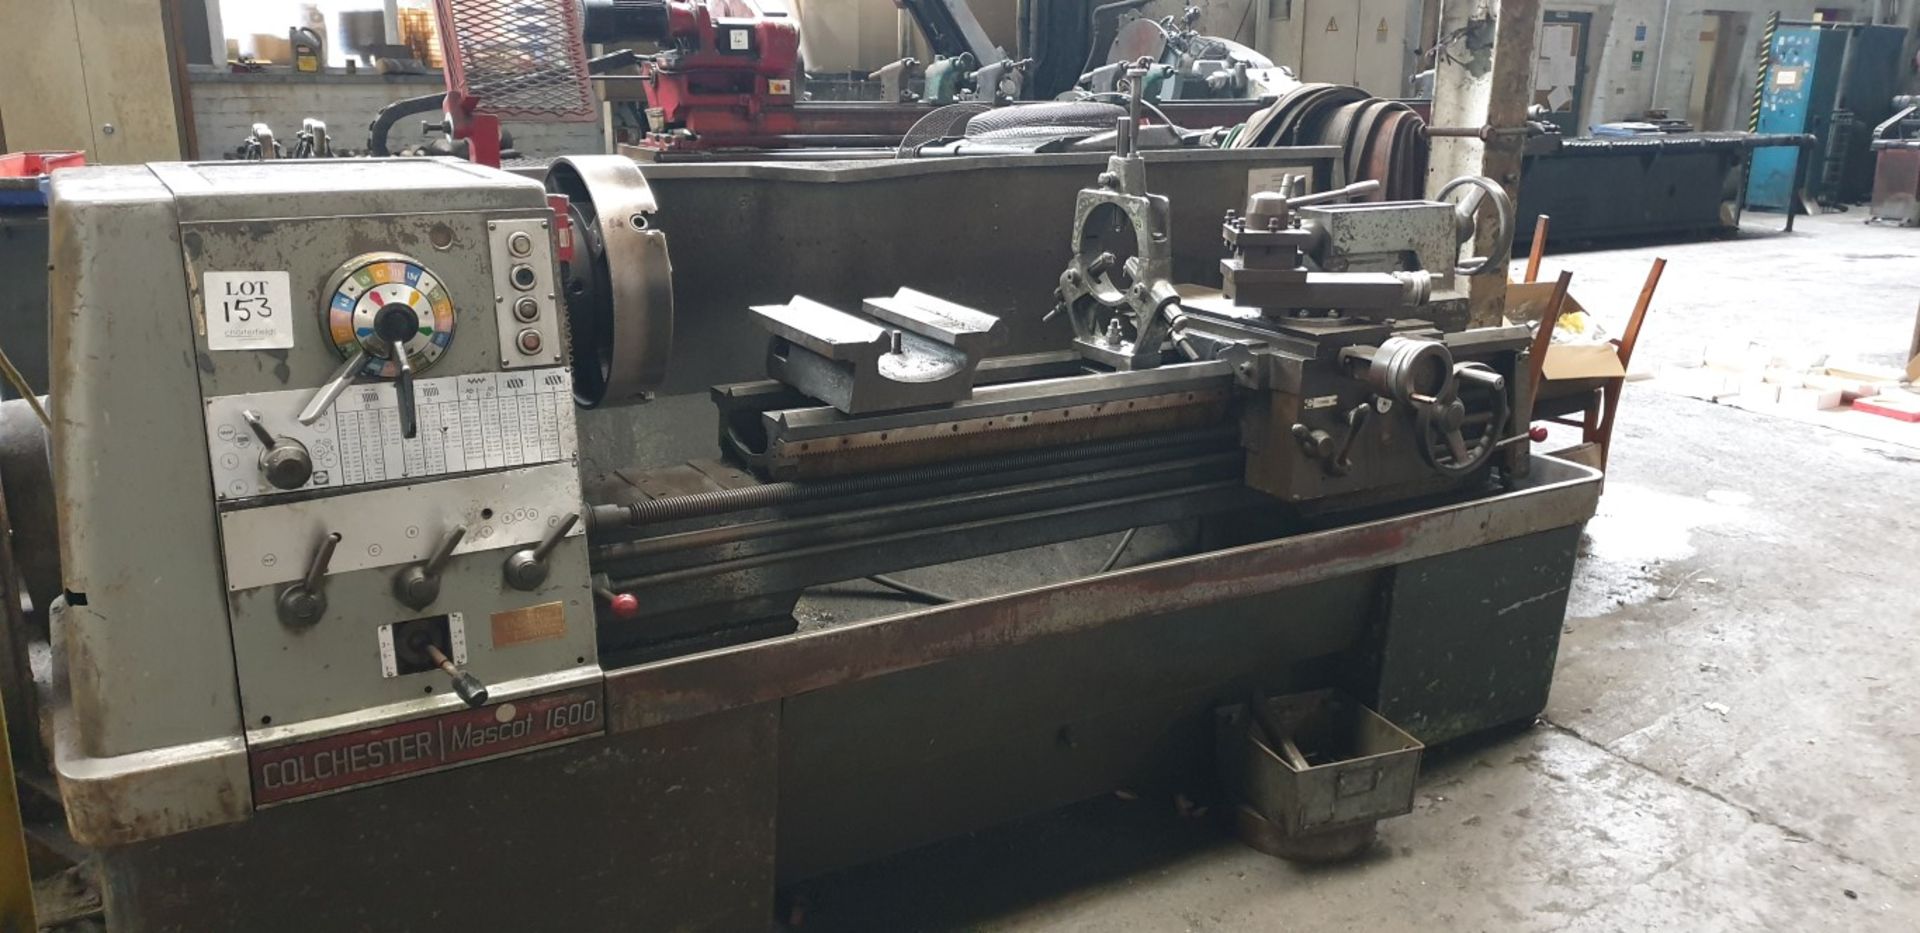 Colchester Mascot 1600 gap bed centre lathe, 700mm swing x 1500mm between centres with fixed